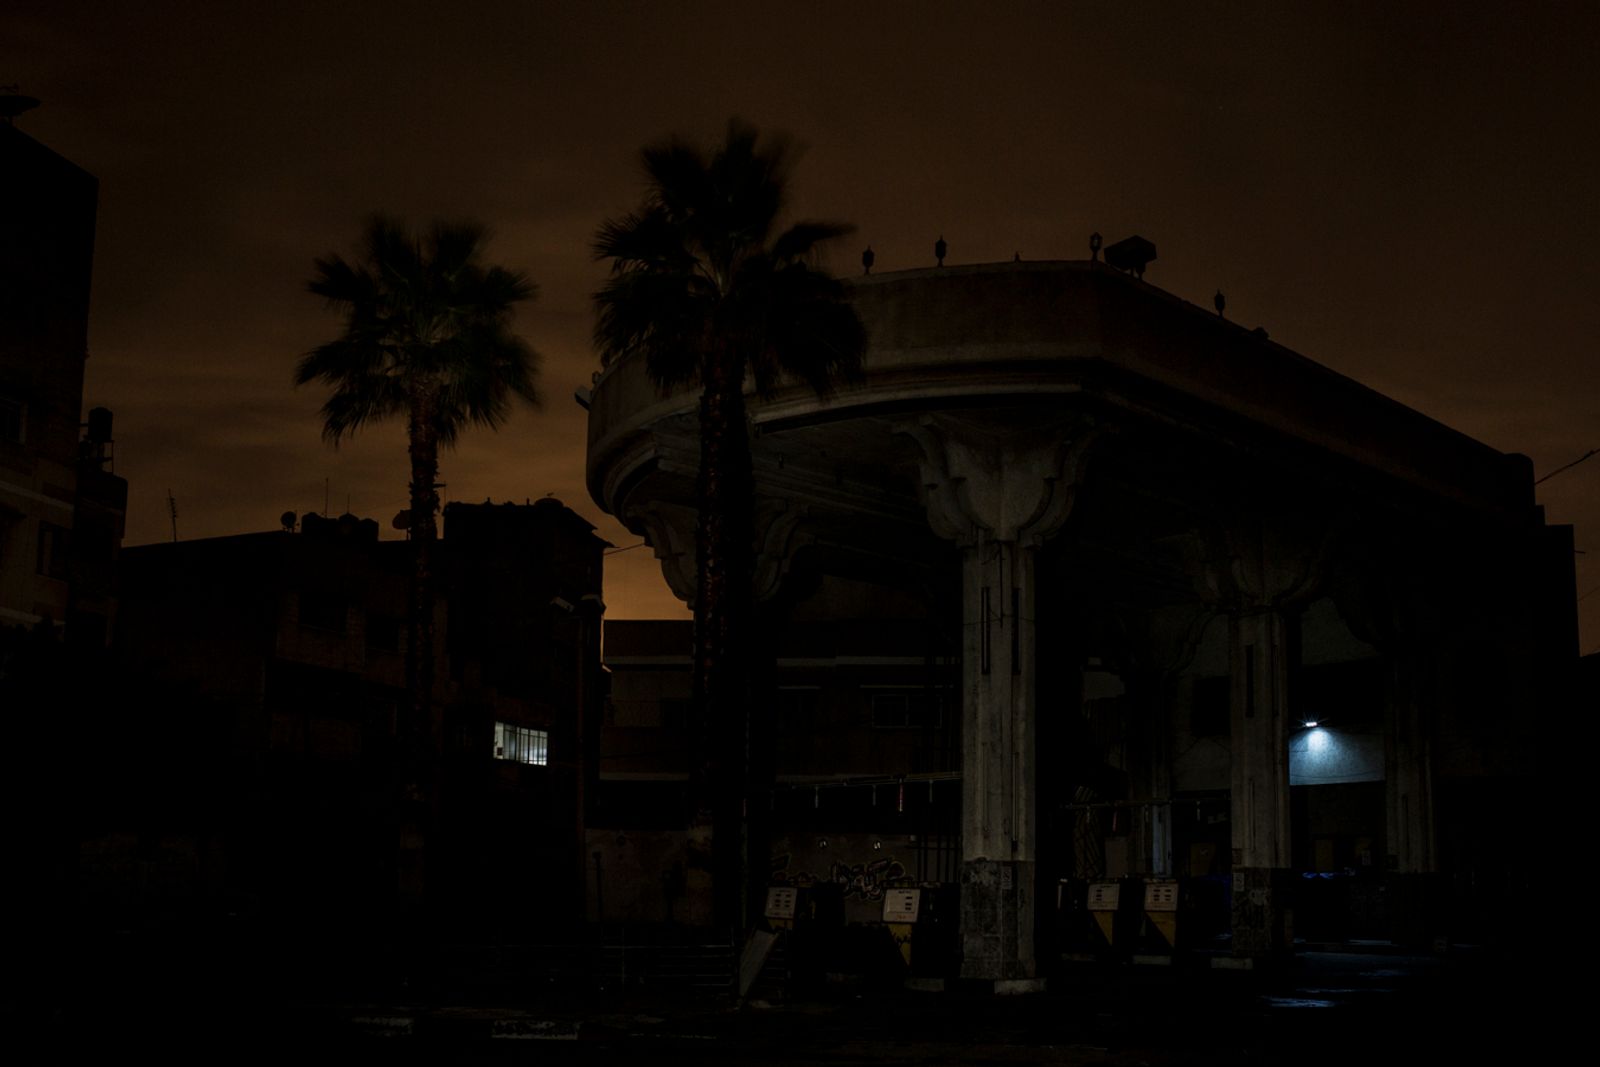 © Gianluca Panella - Image from the Gaza BlackOut photography project